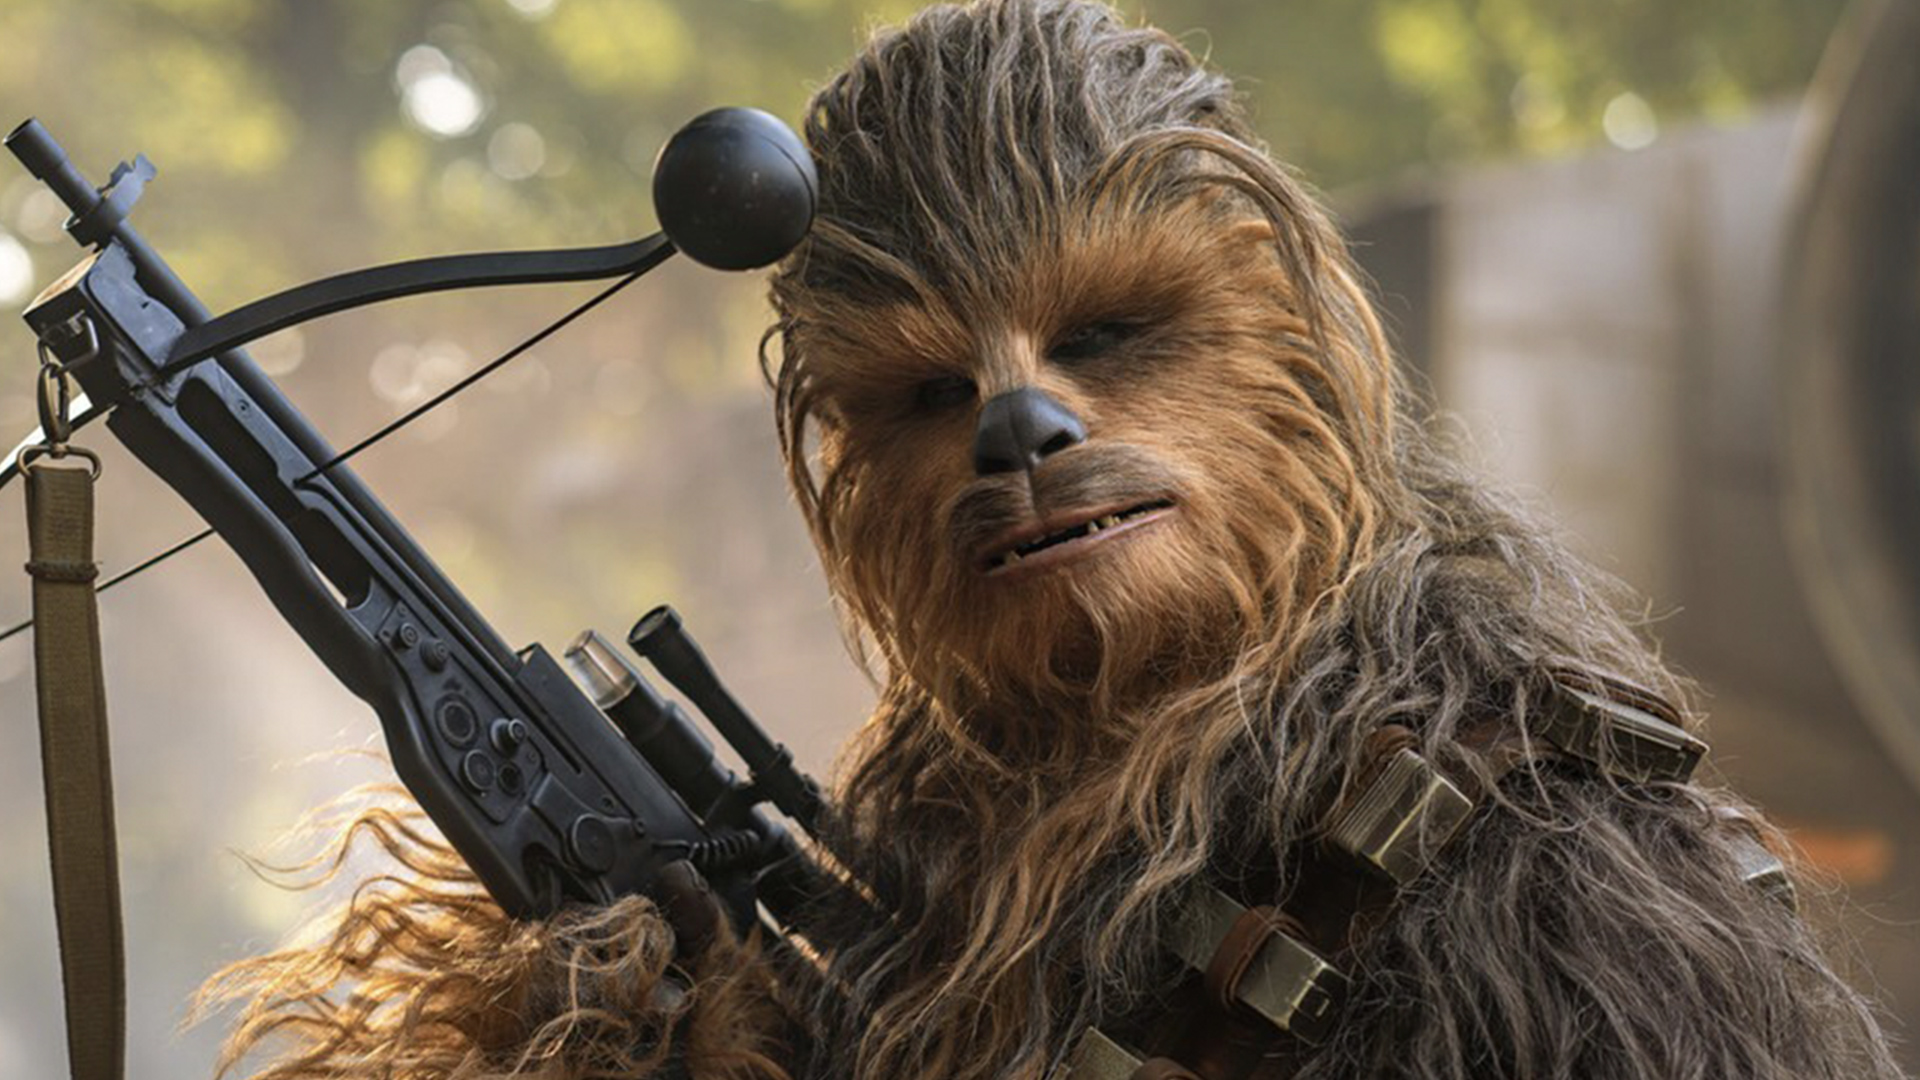 Chewbacca from Star Wars holding his bowcaster